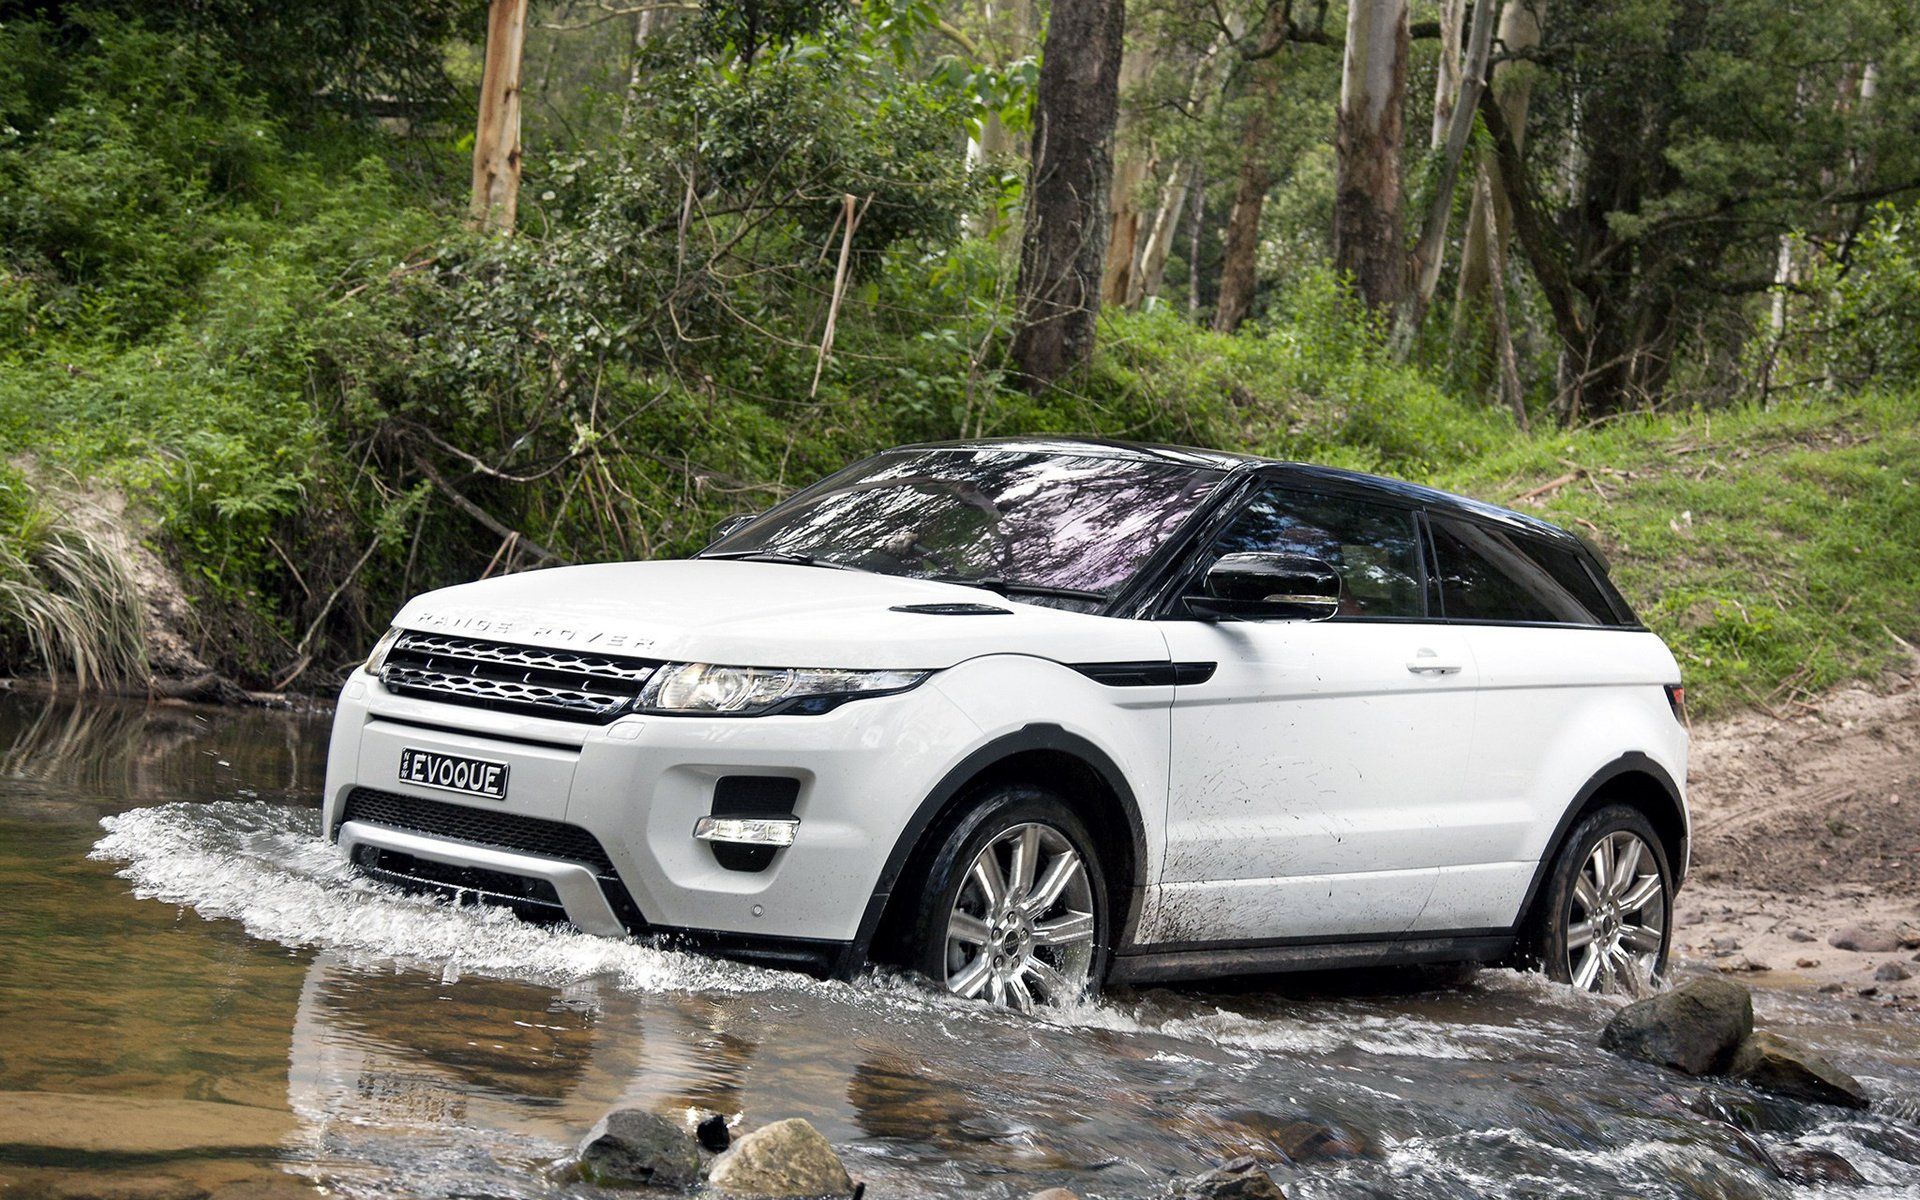 Range Rover EVOQUE: latest models now tuneable.